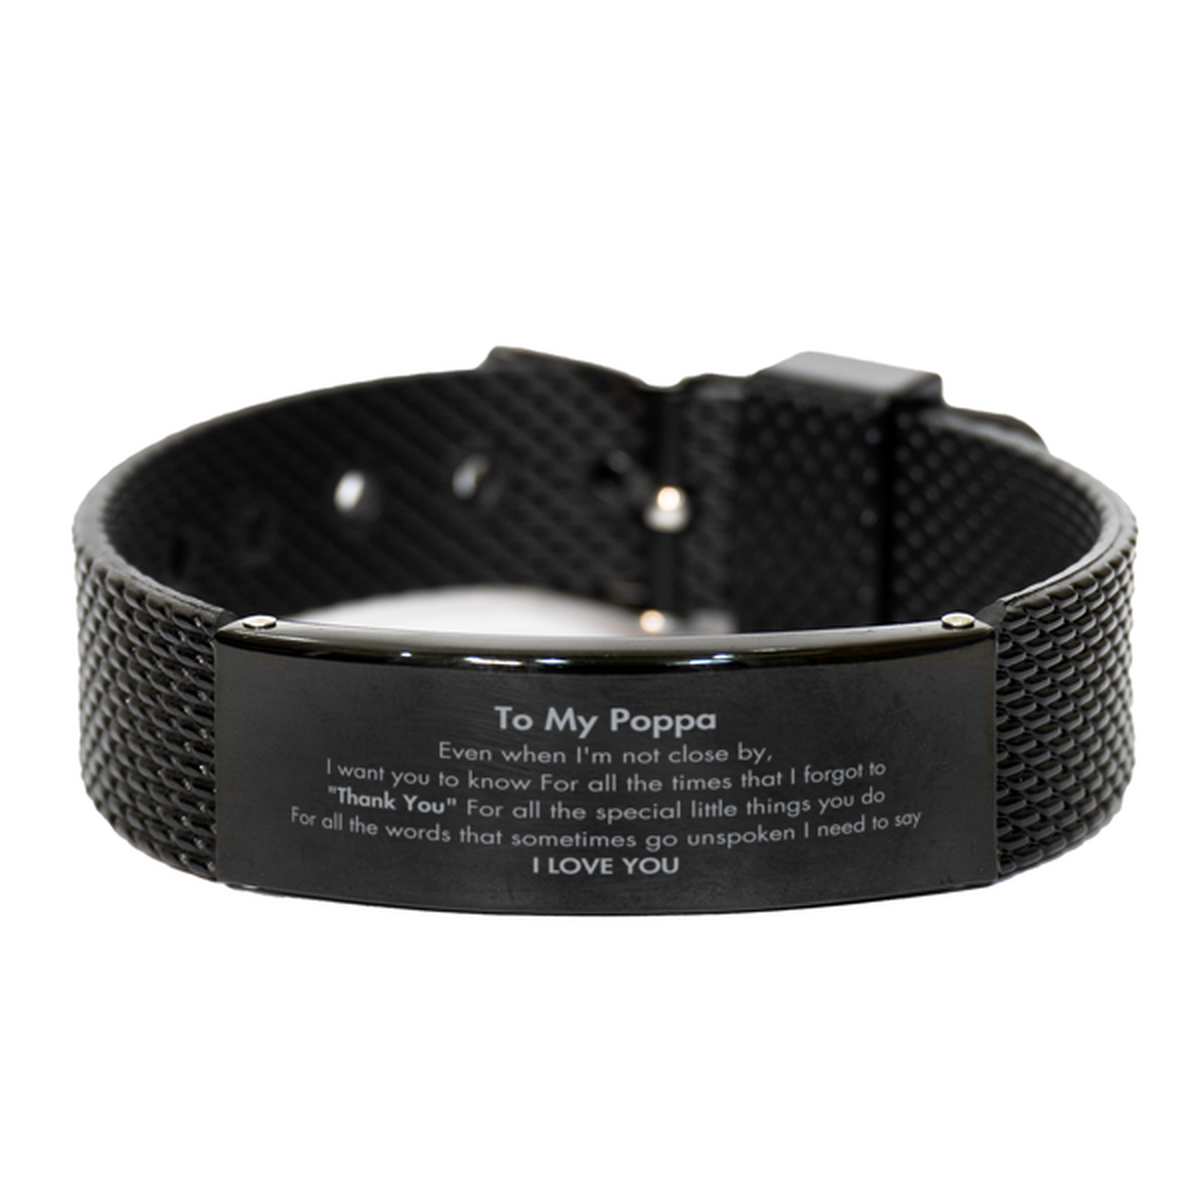 Thank You Gifts for Poppa, Keepsake Black Shark Mesh Bracelet Gifts for Poppa Birthday Mother's day Father's Day Poppa For all the words That sometimes go unspoken I need to say I LOVE YOU